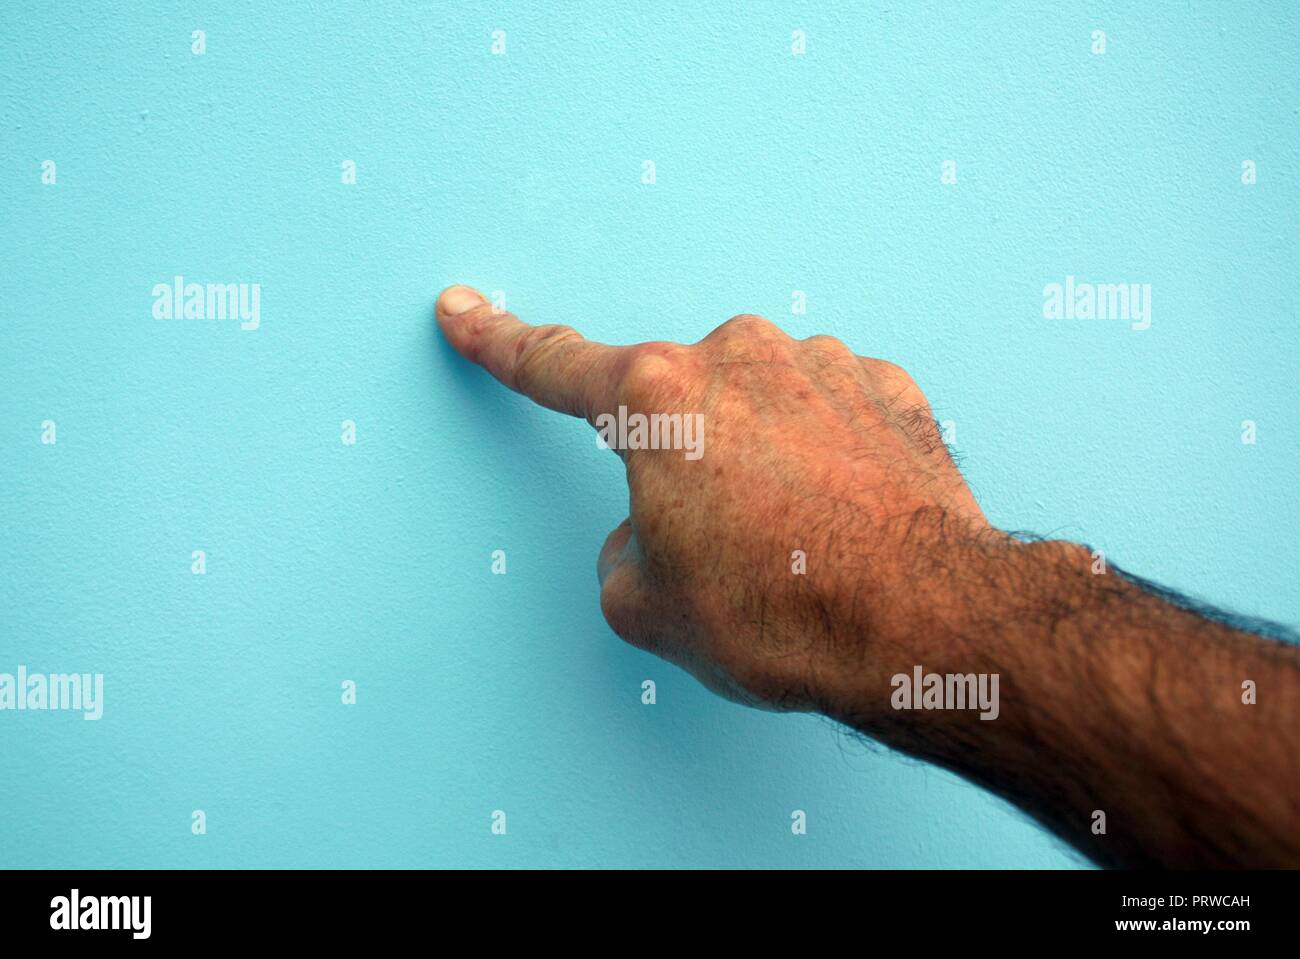 Mans hand pushing an imaginary button Stock Photo